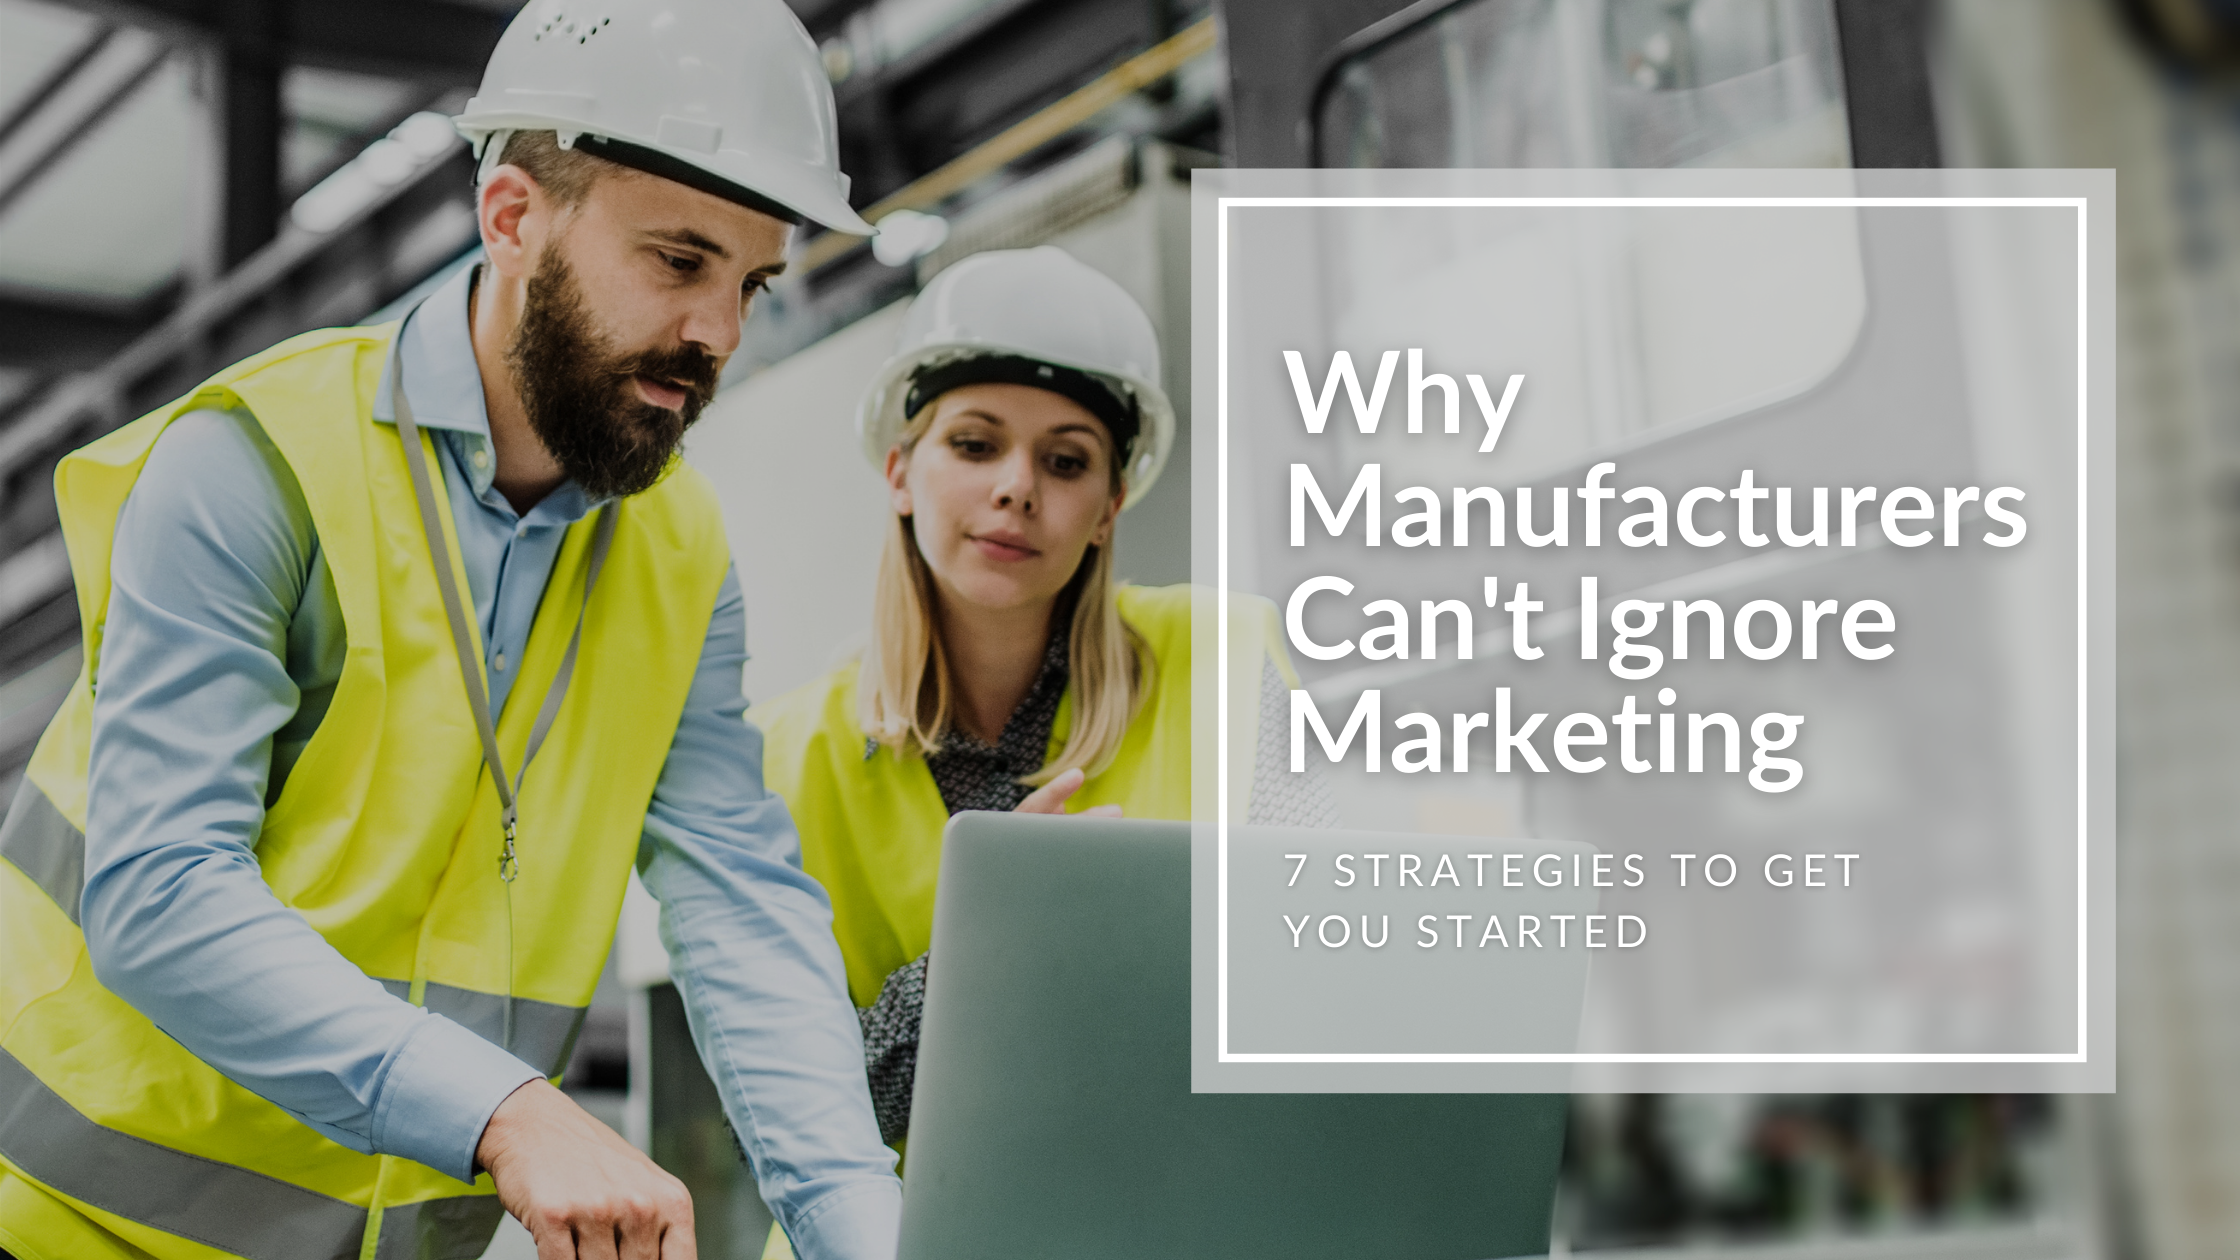 Why Manufacturers Can’t Ignore Marketing